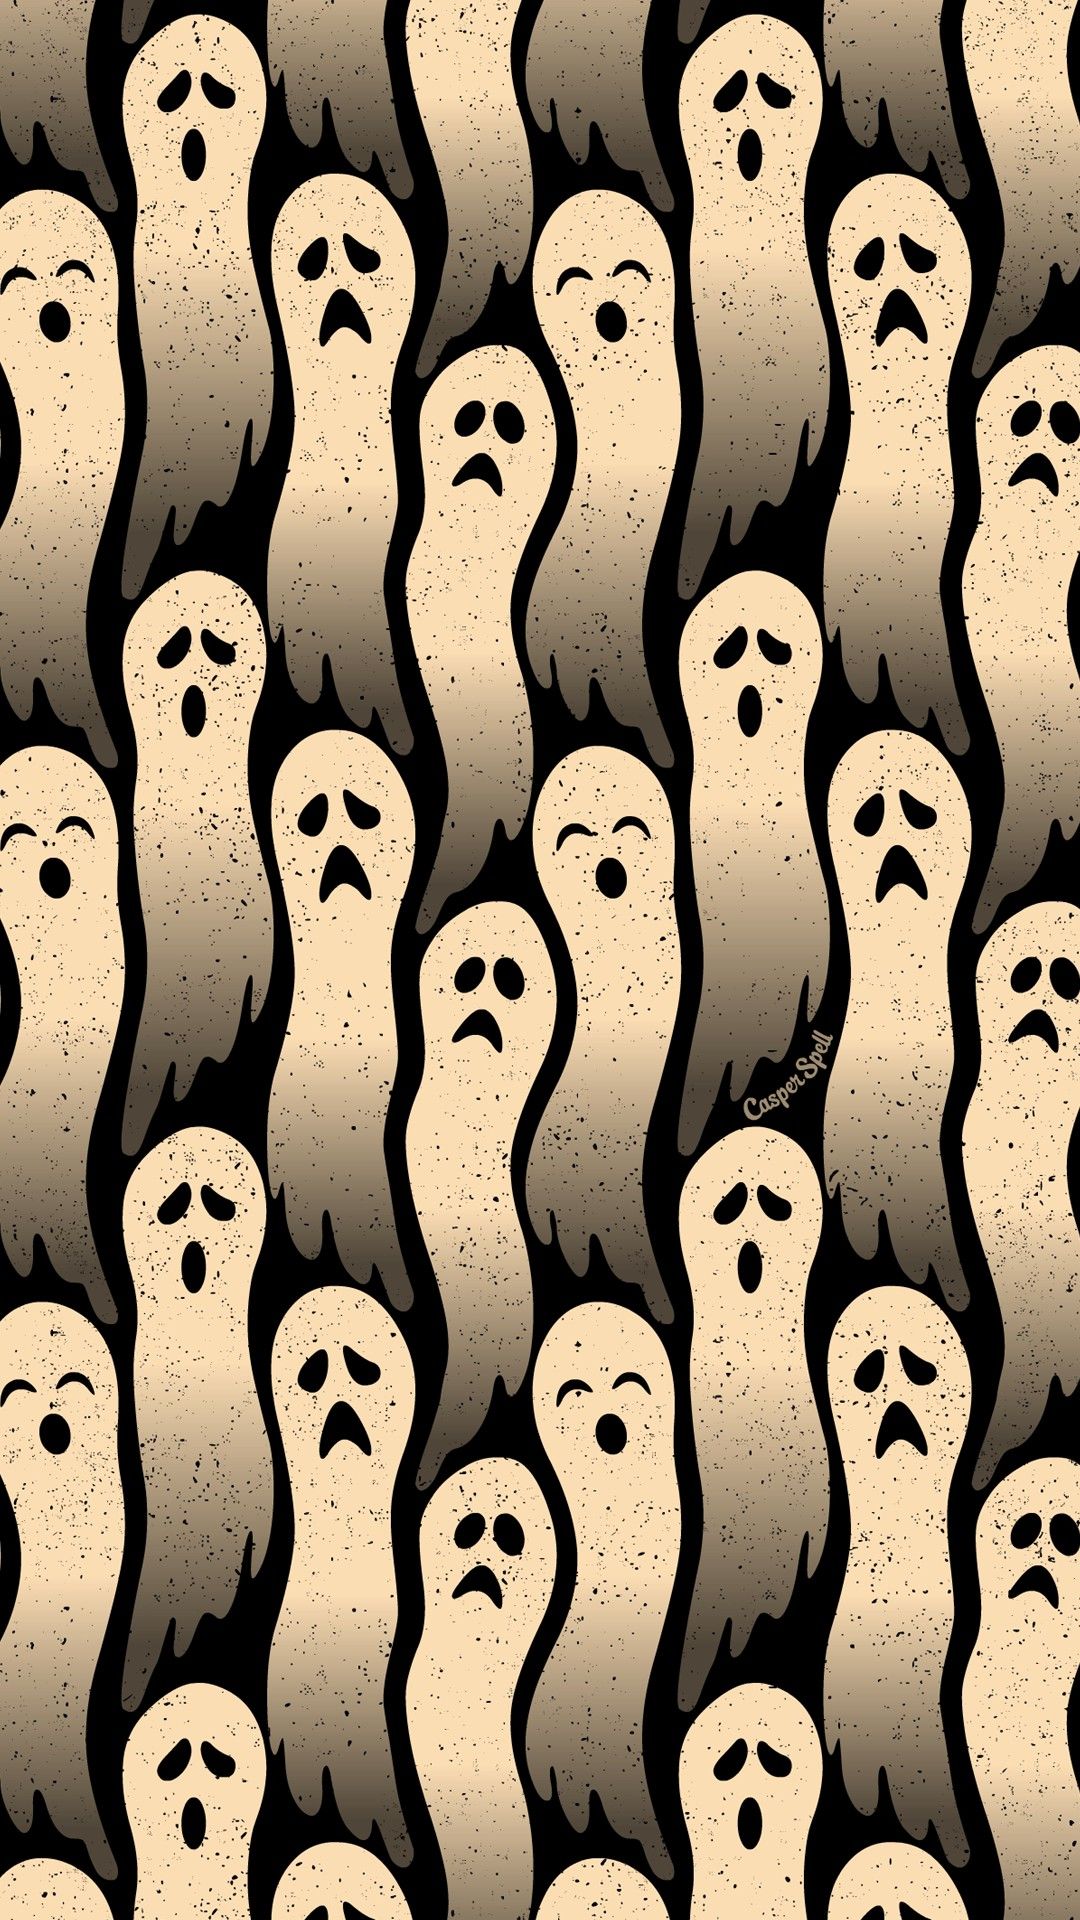 Ghosts repeat pattern Halloween background wallpaper patterns background wallpaper spirits ethereal spooky. Art wallpaper, Halloween art, Halloween background